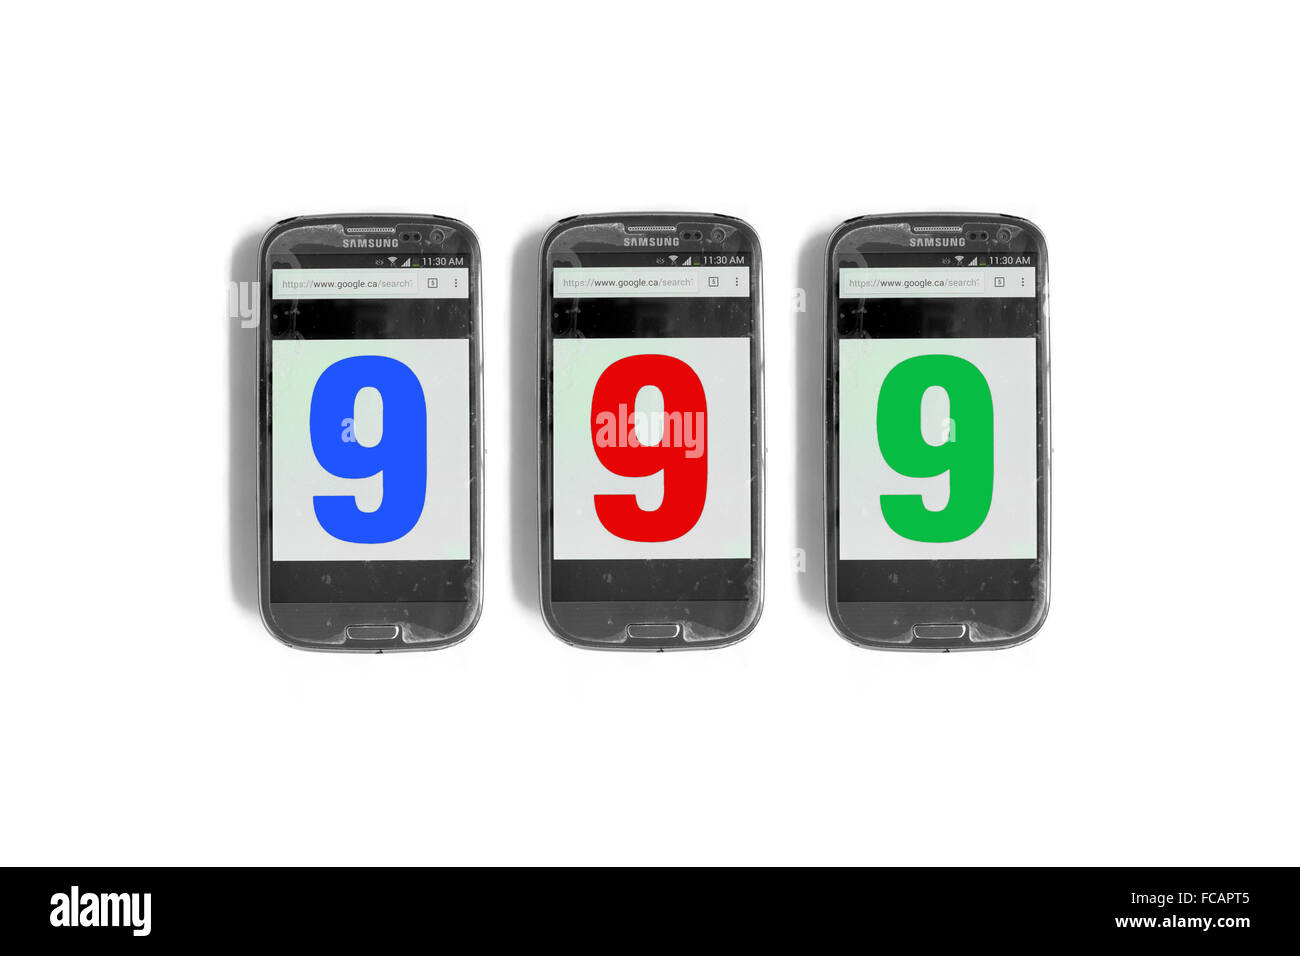 999 written on the screen of smartphones photographed against a white background. Stock Photo